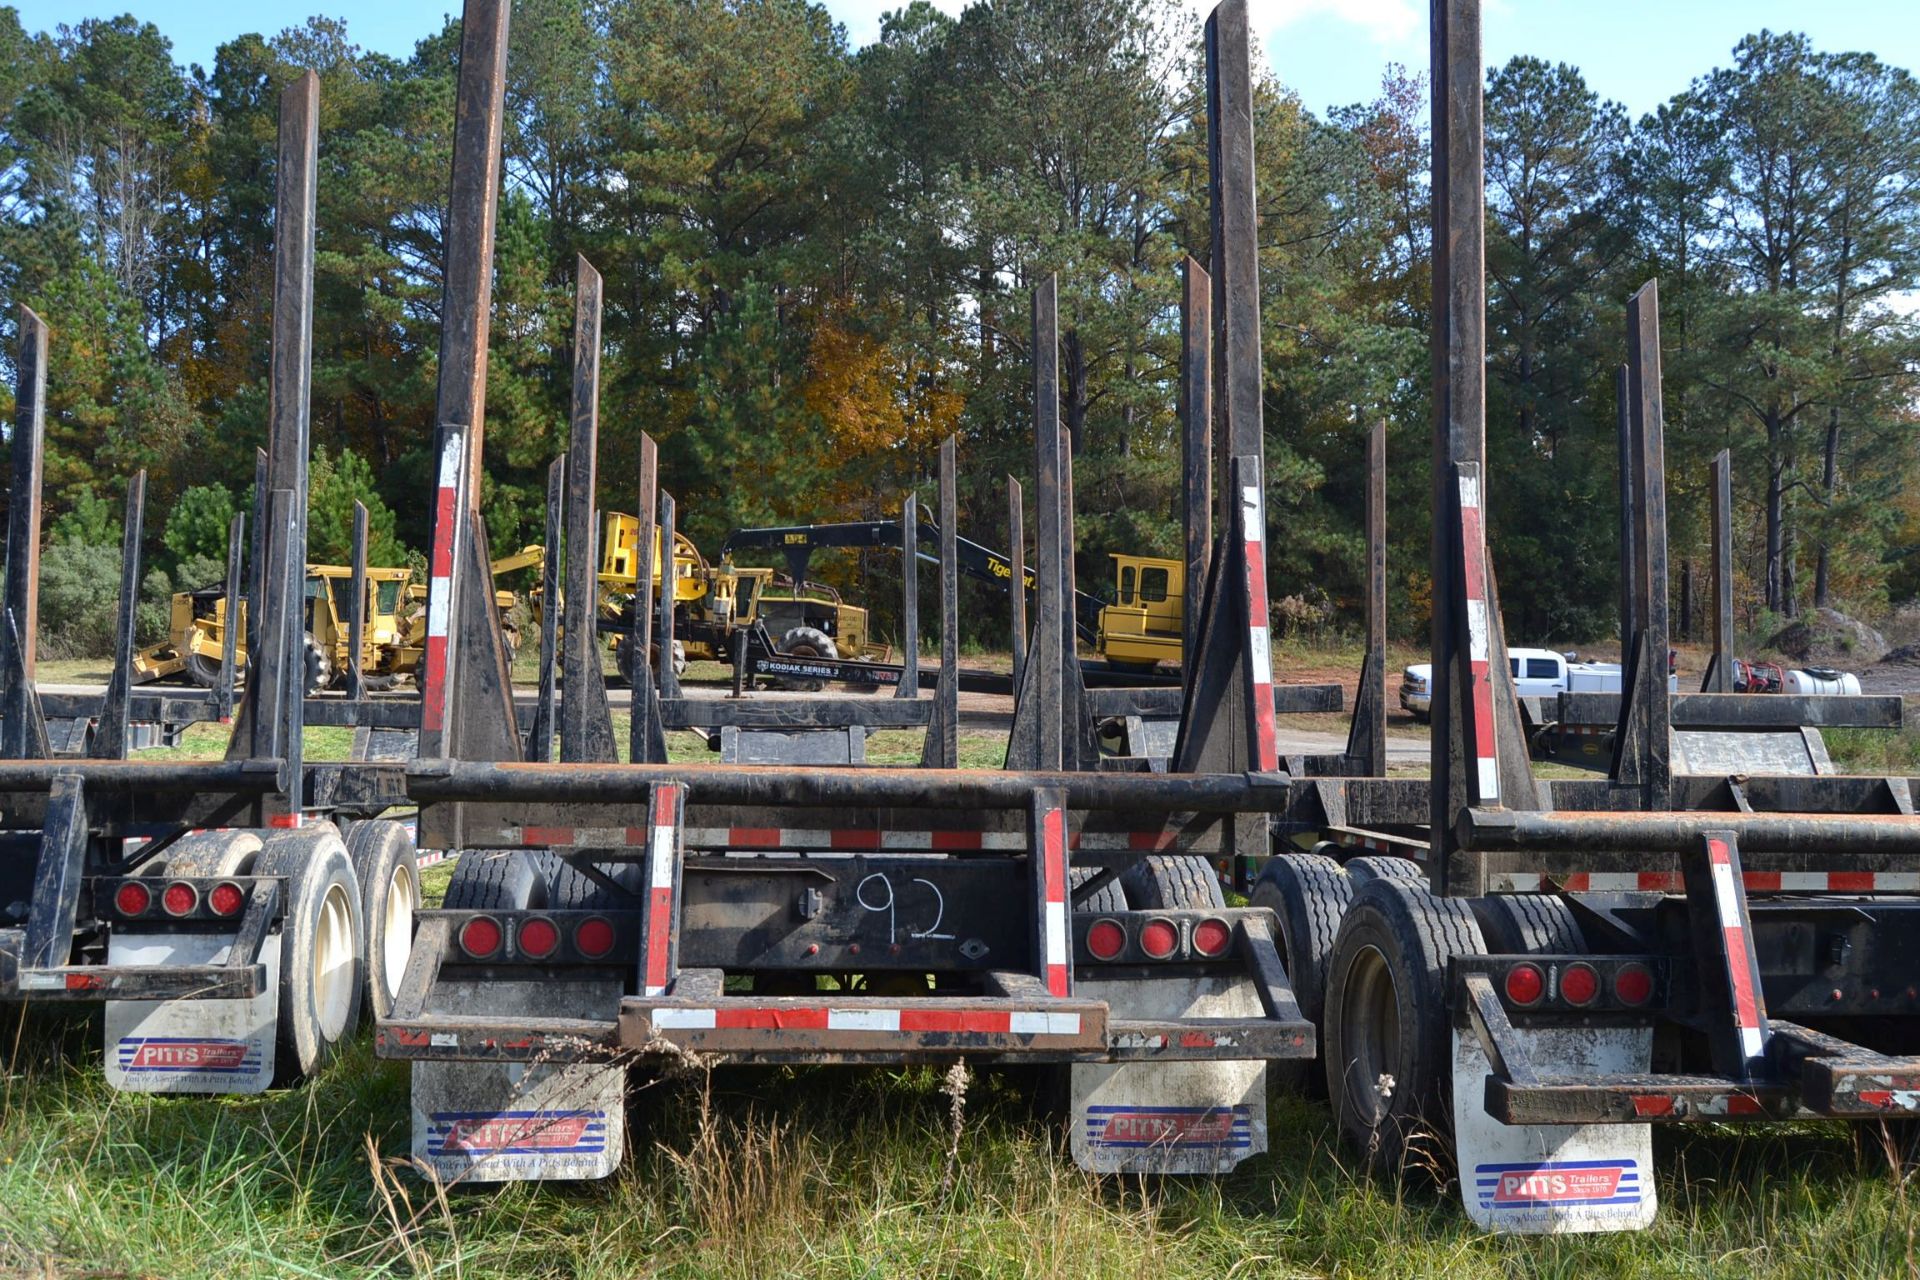 2015 42' PITTS PLANTATION LOG TRAILER W/ SPRING SUSPENSION W/ 4' BOLSTERS SN#5JYLP4029FP151177 - Image 3 of 3